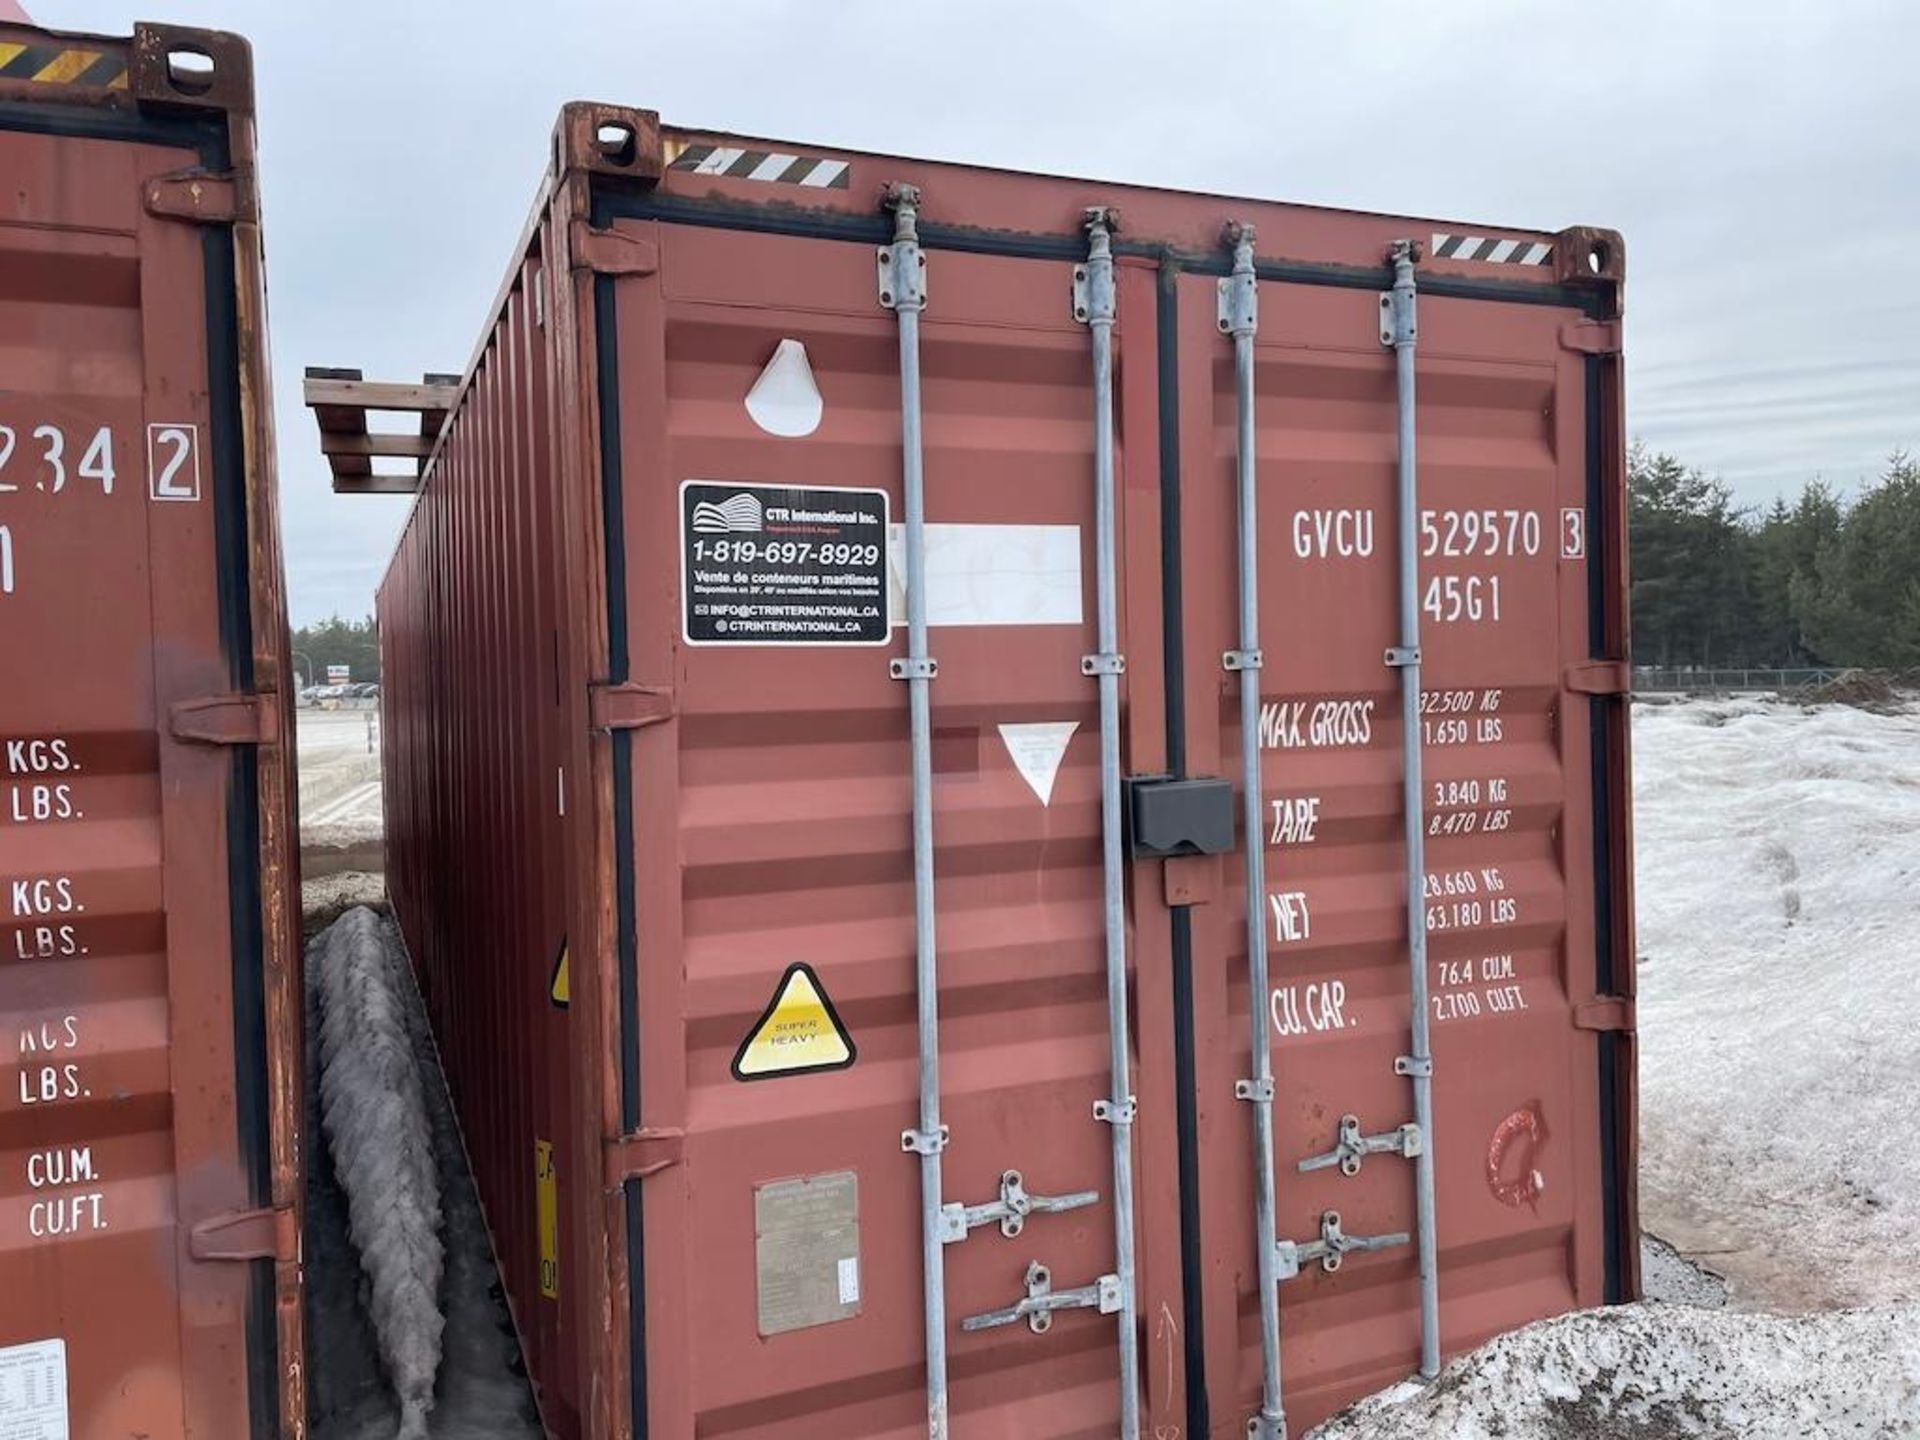 40 FT SEA CONTAINER, EXCLUDING CONTENTS, DELAYED PICK UP UNTIL MAY 13 [1] [TROIS RIVIERES] *PLEASE N